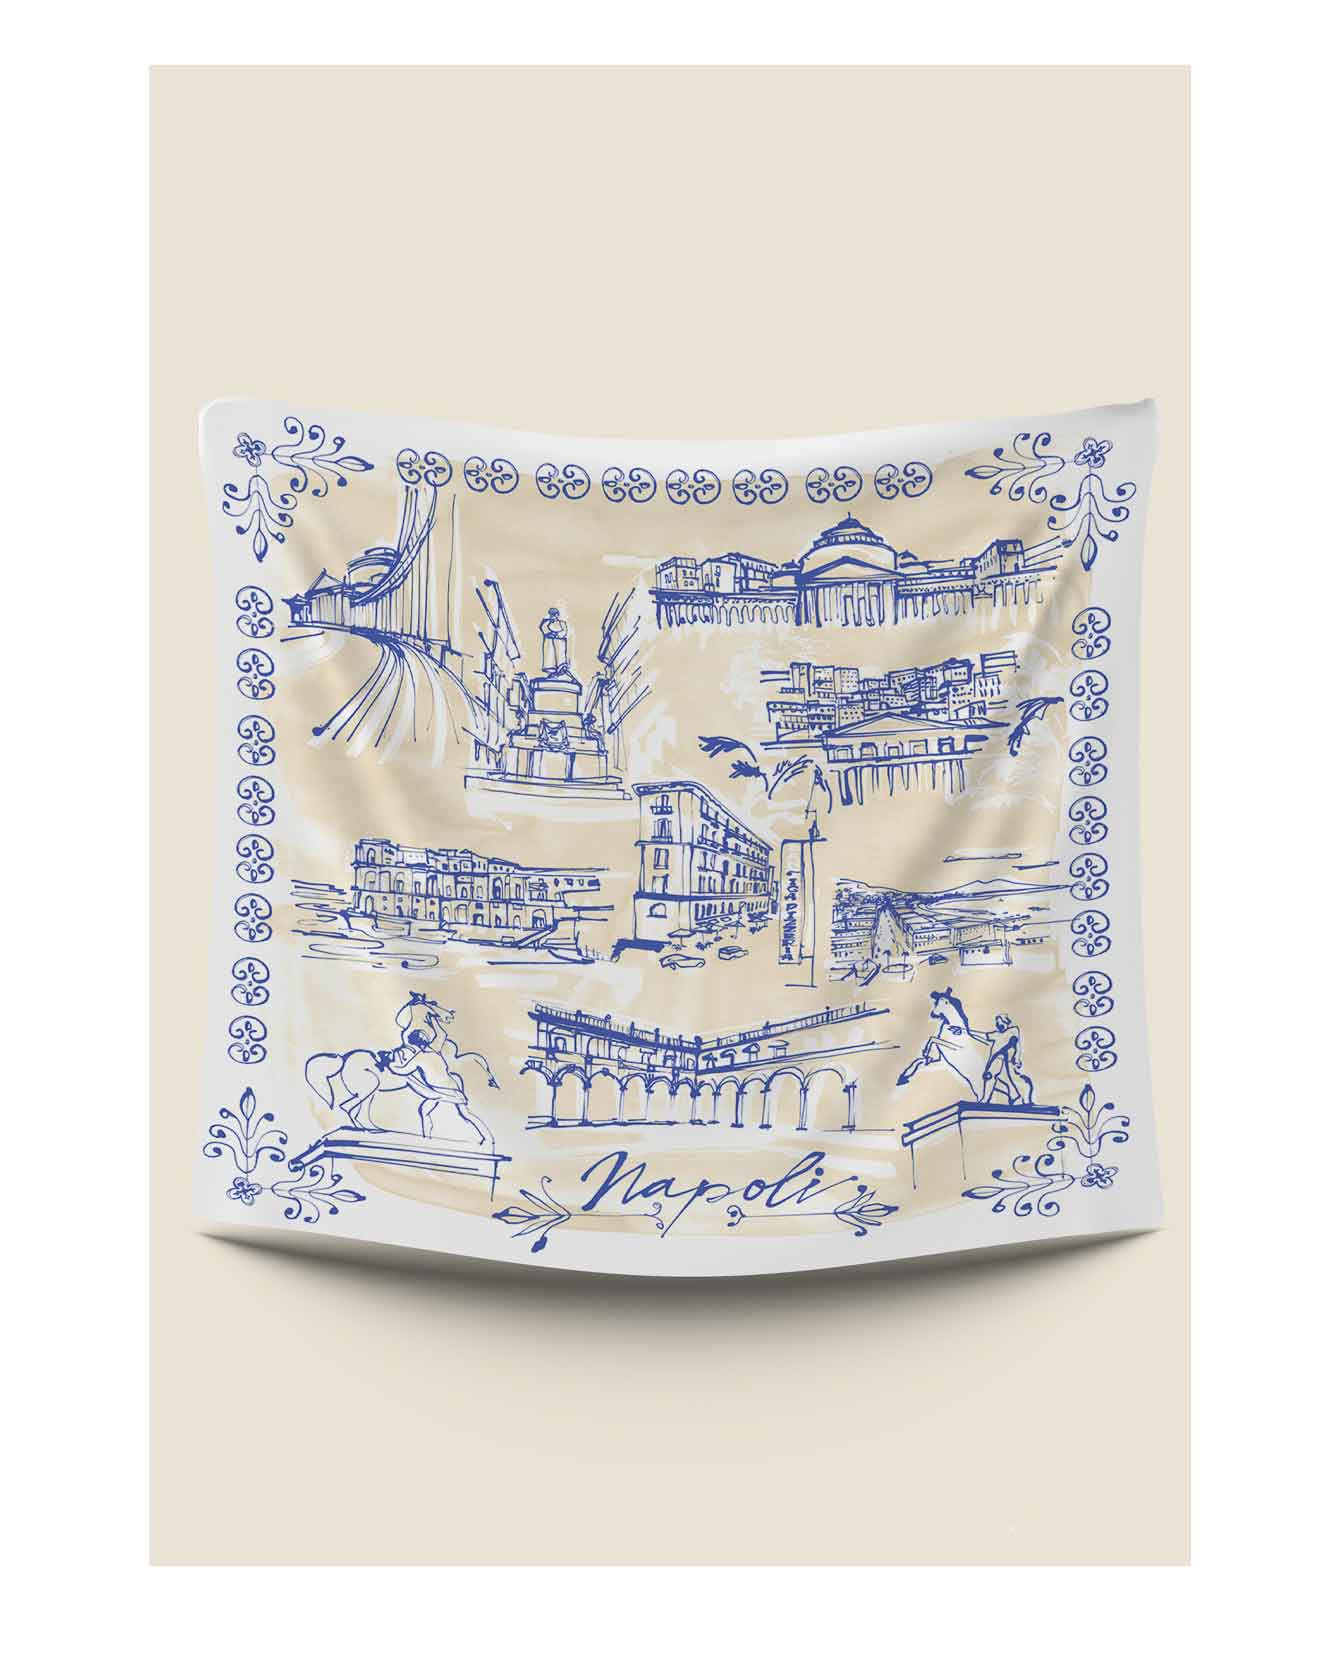 Silk scarf illustration. Inspired by Italian city of Naples for fashion brand Kiton, who's headquarters are in the ancient Italian city. Simple linear style illustration and flat colours taken from the fashion houses upcoming collections. With drawings of famous Naples landmarks and architecture.